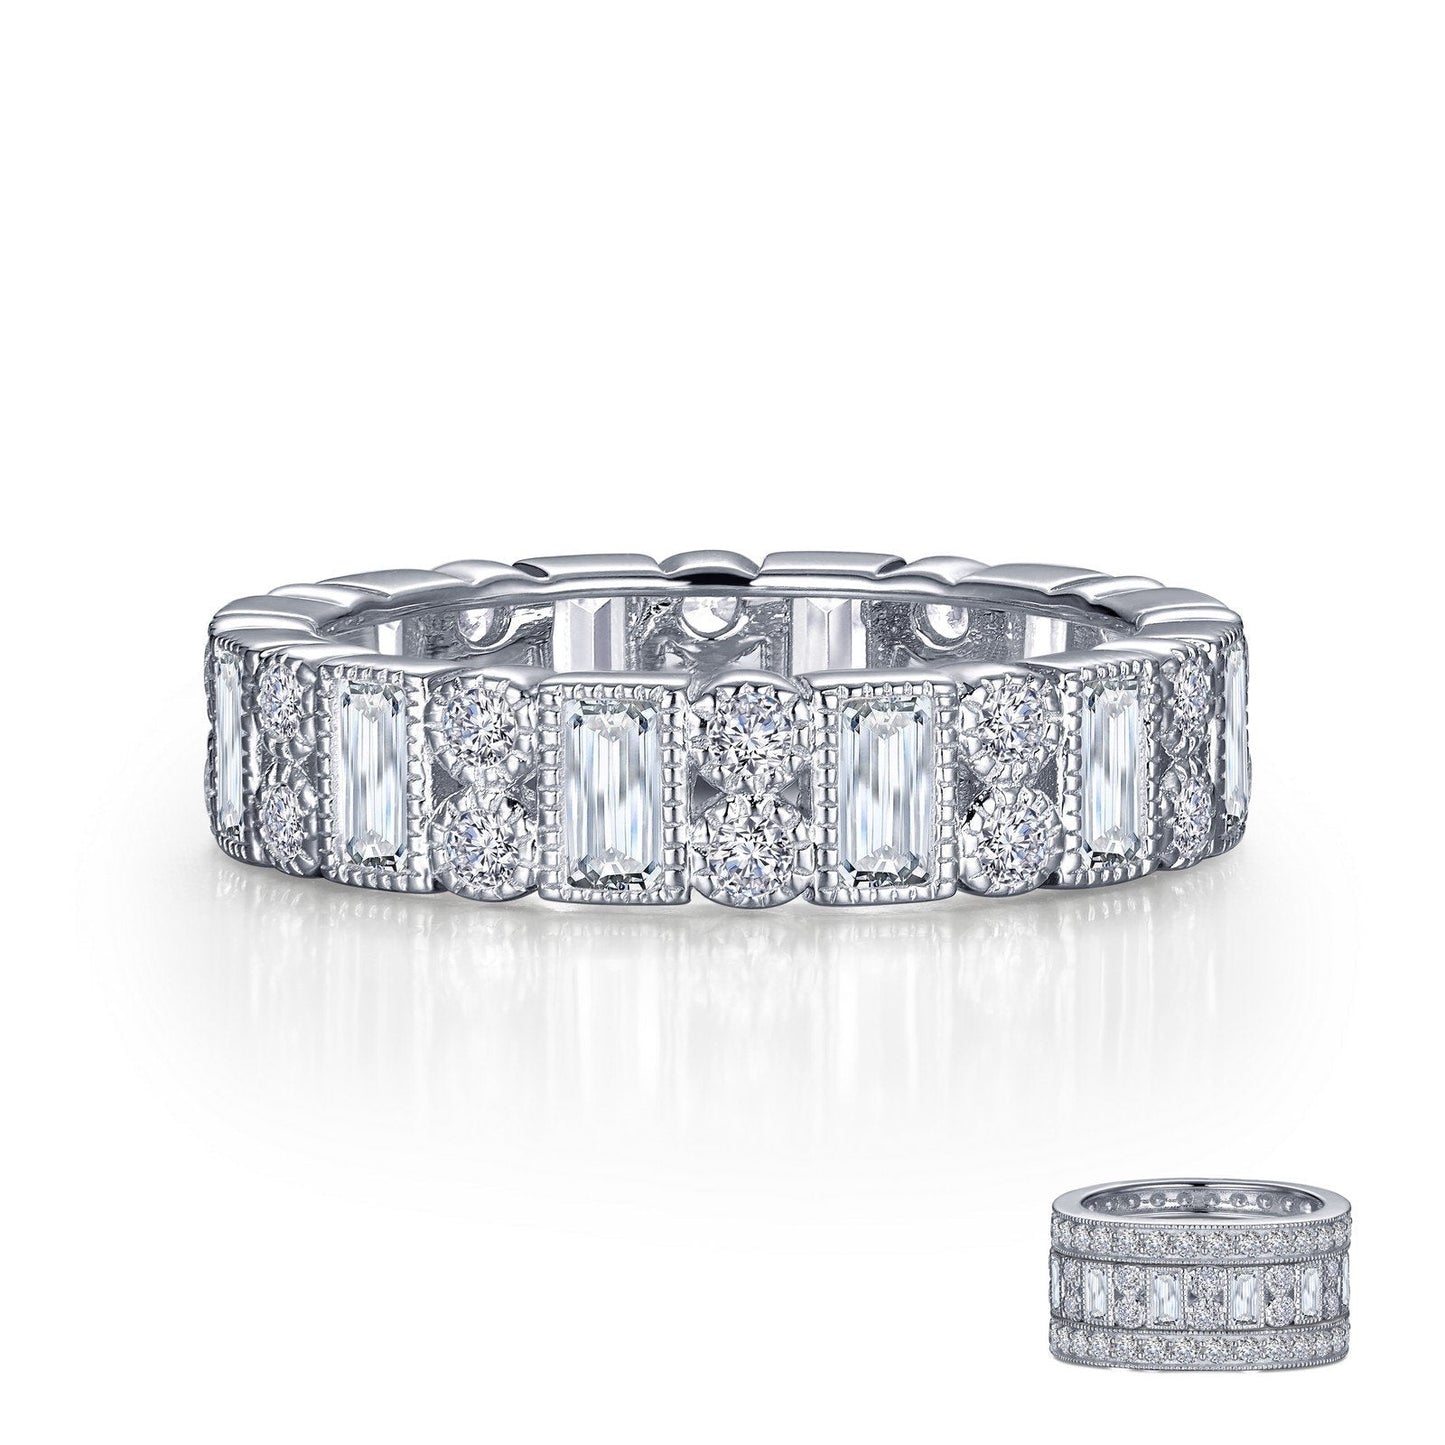 Load image into Gallery viewer, Lafonn Alternating Eternity Band Simulated Diamond RINGS Size 6 Platinum 1.68 CTS 4.9mm(W)
